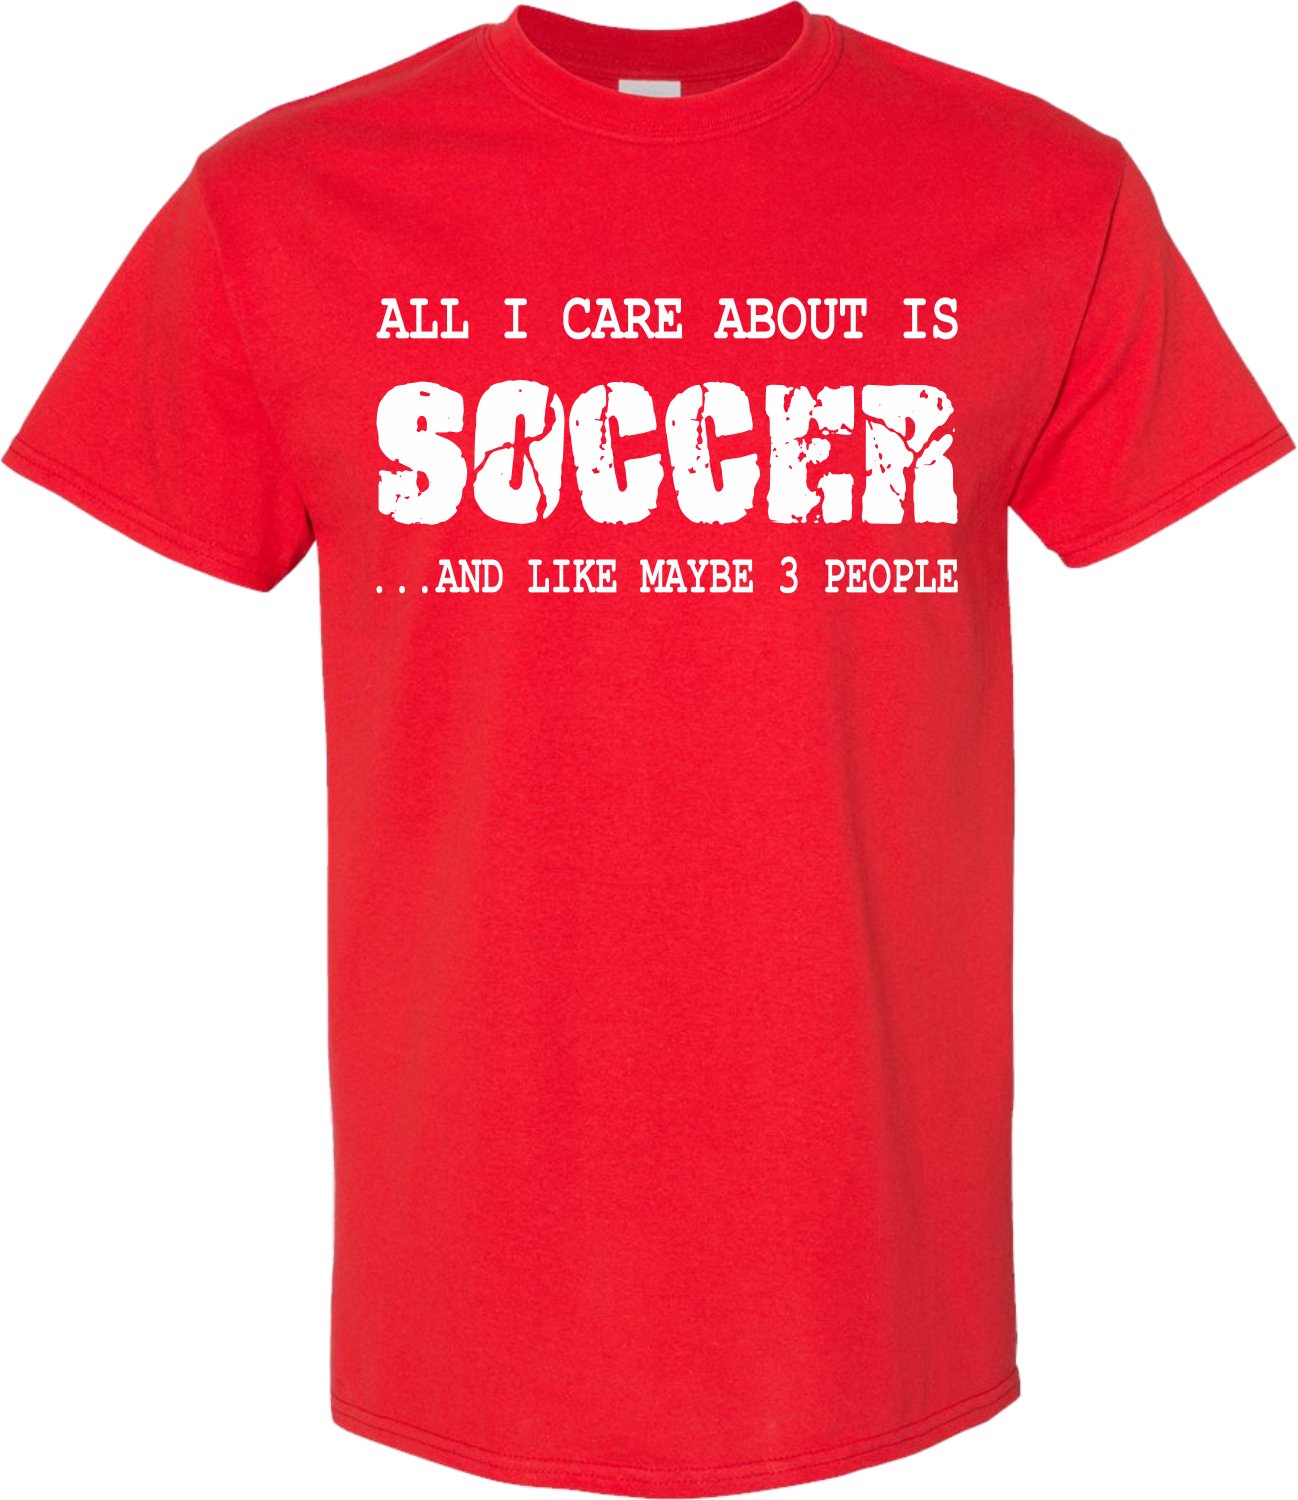 All I care about is SOCCER and like maybe 3 people T shirt - SBS T Shop